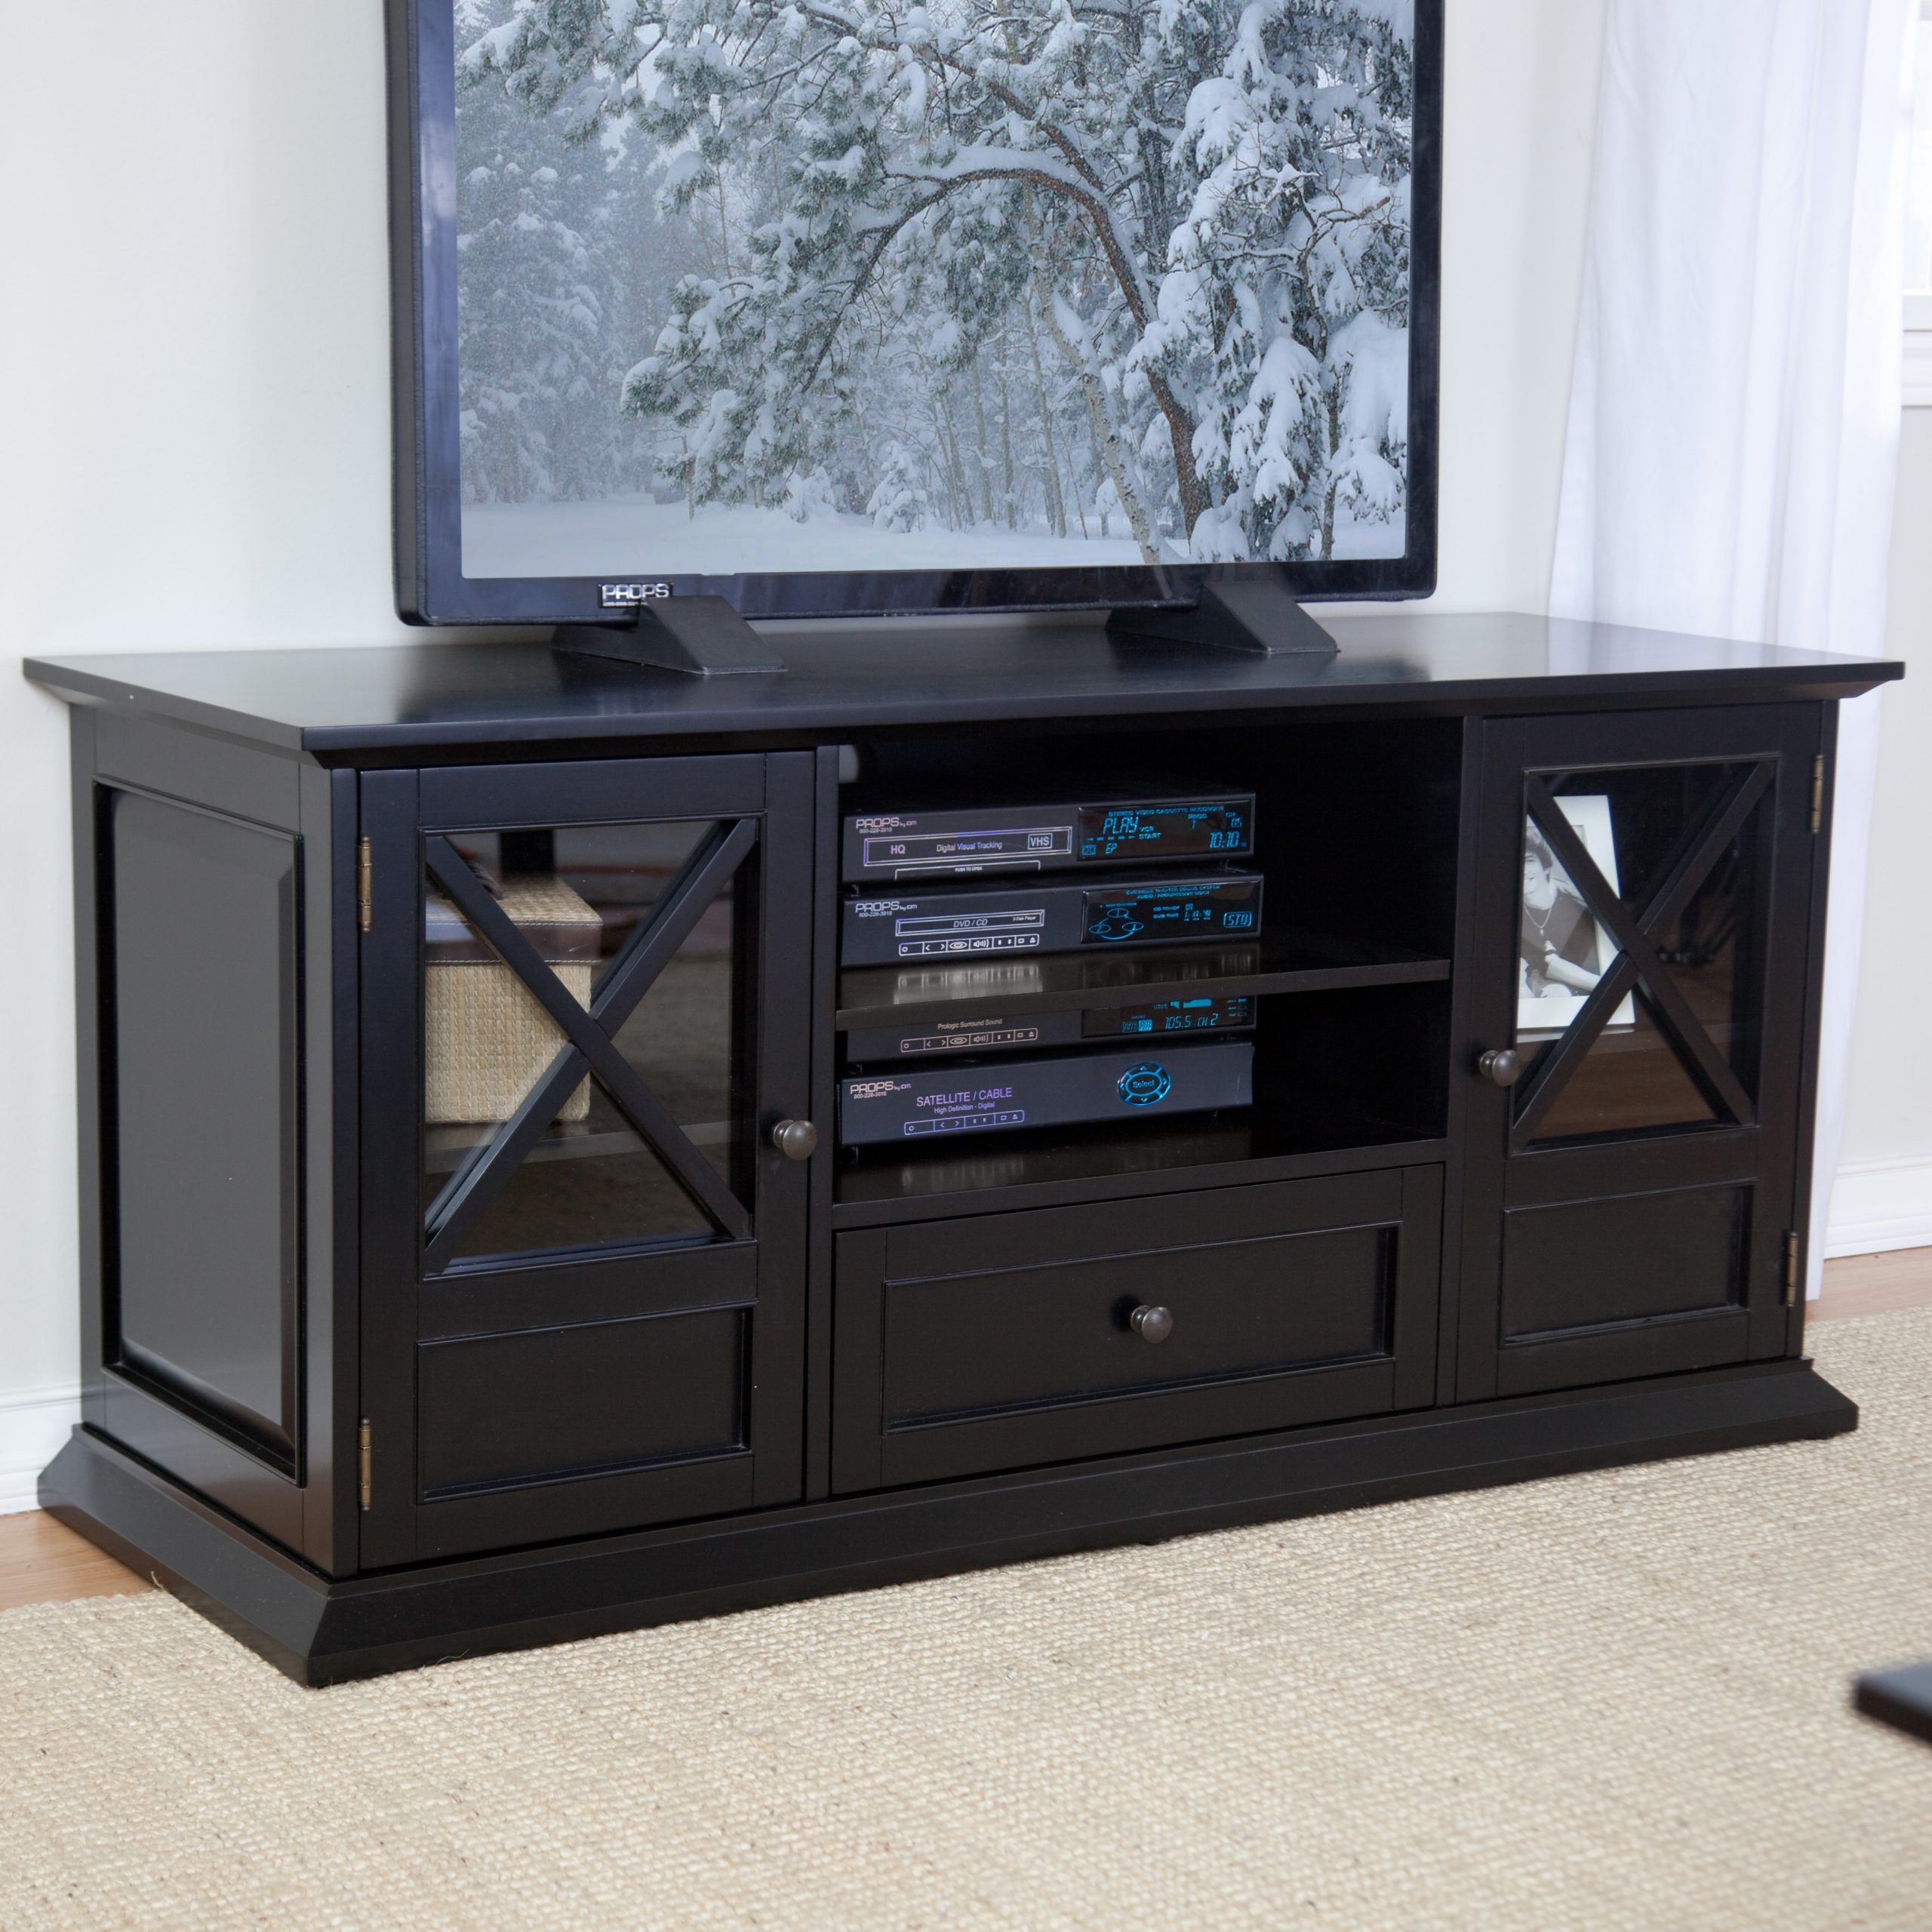 Belham Living Hampton 55 Inch Tv Stand – Black At Hayneedle Intended For Jackson Wide Tv Stands (View 3 of 15)